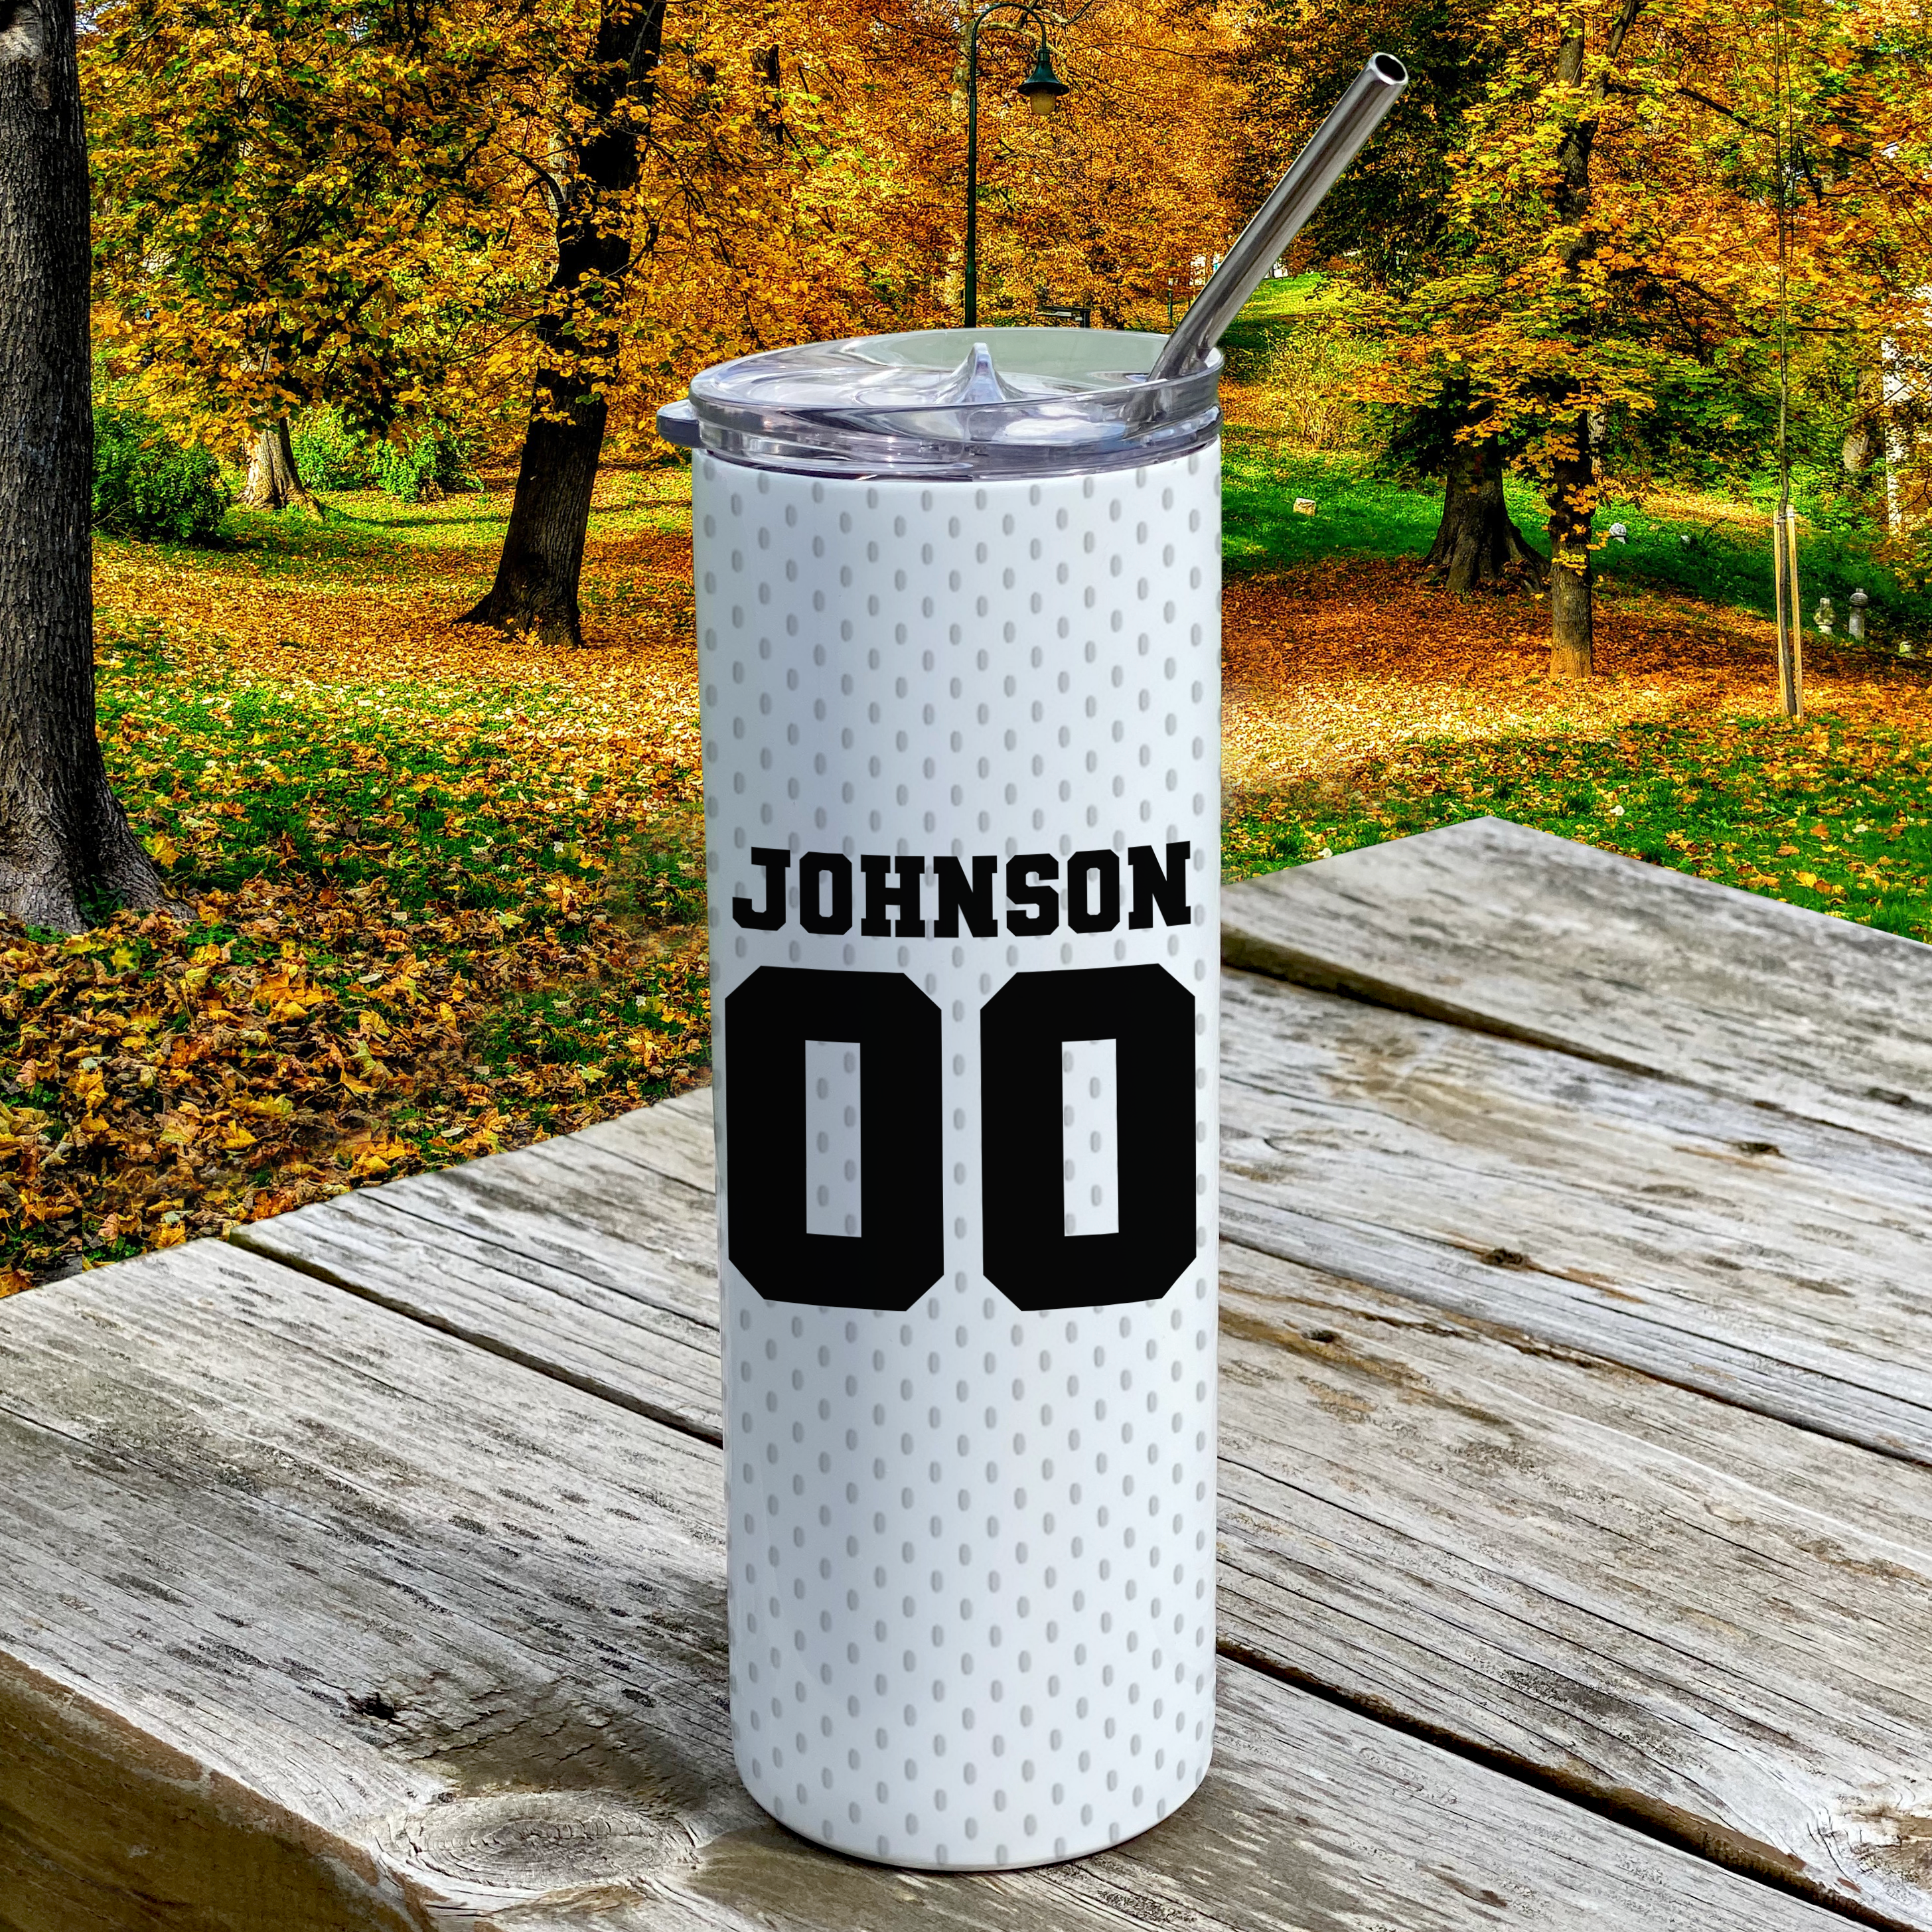 Sports Collection (Football Mom - Personalized) 20 Oz Stainless Steel Travel Tumbler with Straw (White)